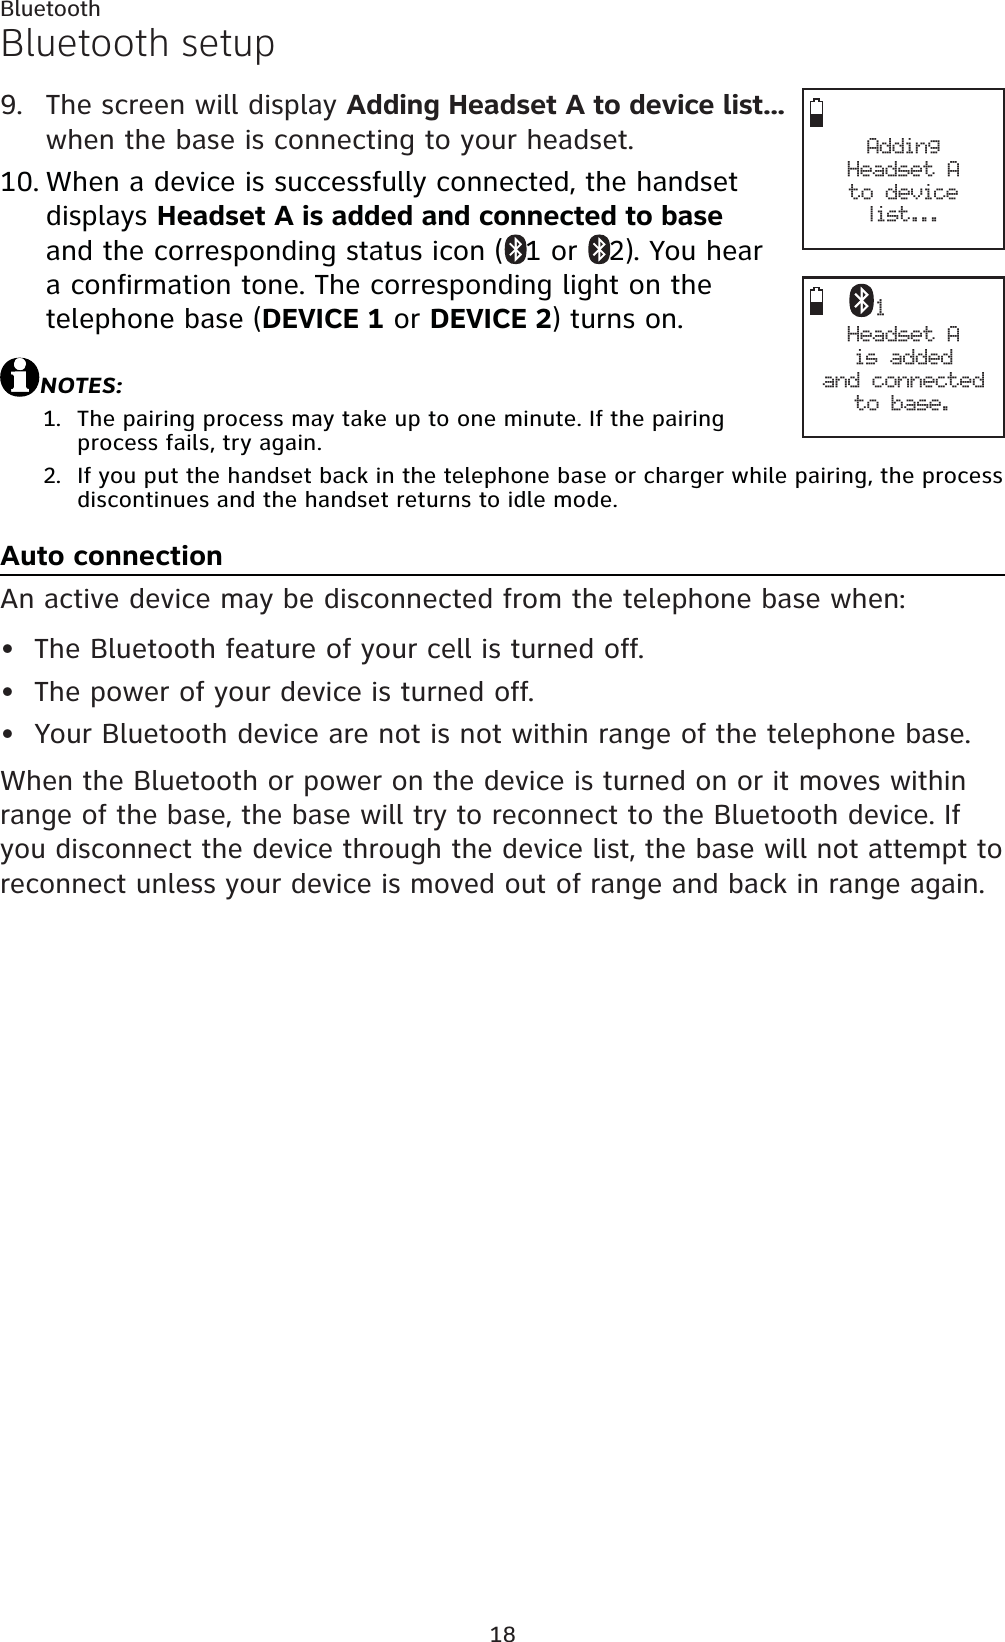 18BluetoothBluetooth setupThe screen will display Adding Headset A to device list...when the base is connecting to your headset.When a device is successfully connected, the handset displays Headset A is added and connected to baseand the corresponding status icon ( 1 or  2). You hear a confirmation tone. The corresponding light on the telephone base (DEVICE 1 or DEVICE 2) turns on.NOTES:The pairing process may take up to one minute. If the pairing process fails, try again.If you put the handset back in the telephone base or charger while pairing, the process discontinues and the handset returns to idle mode.Auto connectionAn active device may be disconnected from the telephone base when:The Bluetooth feature of your cell is turned off.The power of your device is turned off.Your Bluetooth device are not is not within range of the telephone base.When the Bluetooth or power on the device is turned on or it moves within range of the base, the base will try to reconnect to the Bluetooth device. If you disconnect the device through the device list, the base will not attempt to reconnect unless your device is moved out of range and back in range again.9.10.1.2.•••Adding Headset A to devicelist...Headset Ais added and connectedto base.1